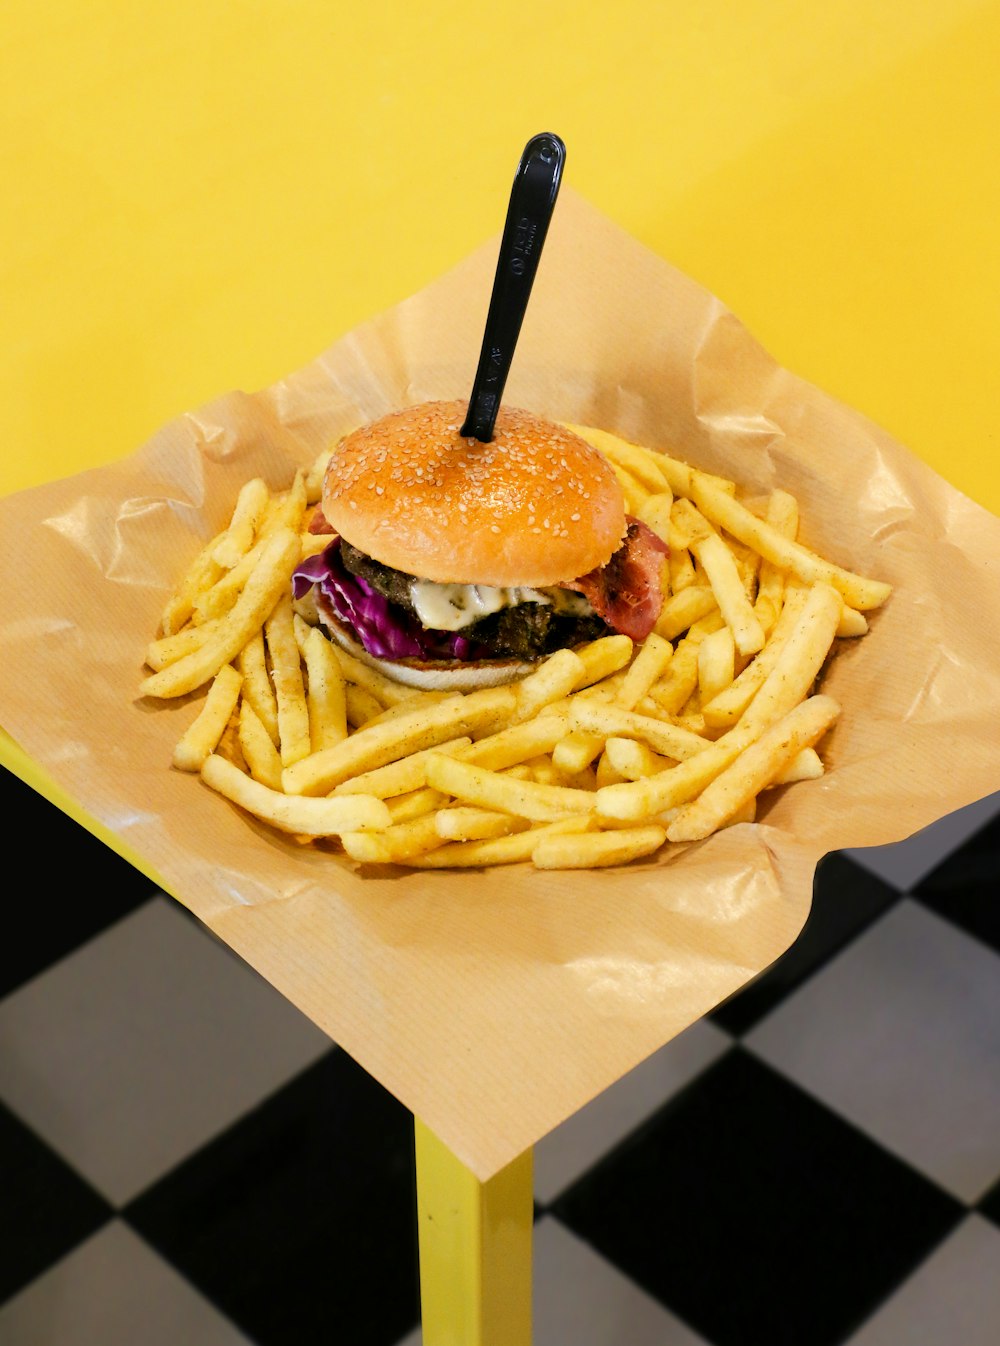 burger with fries on white paper